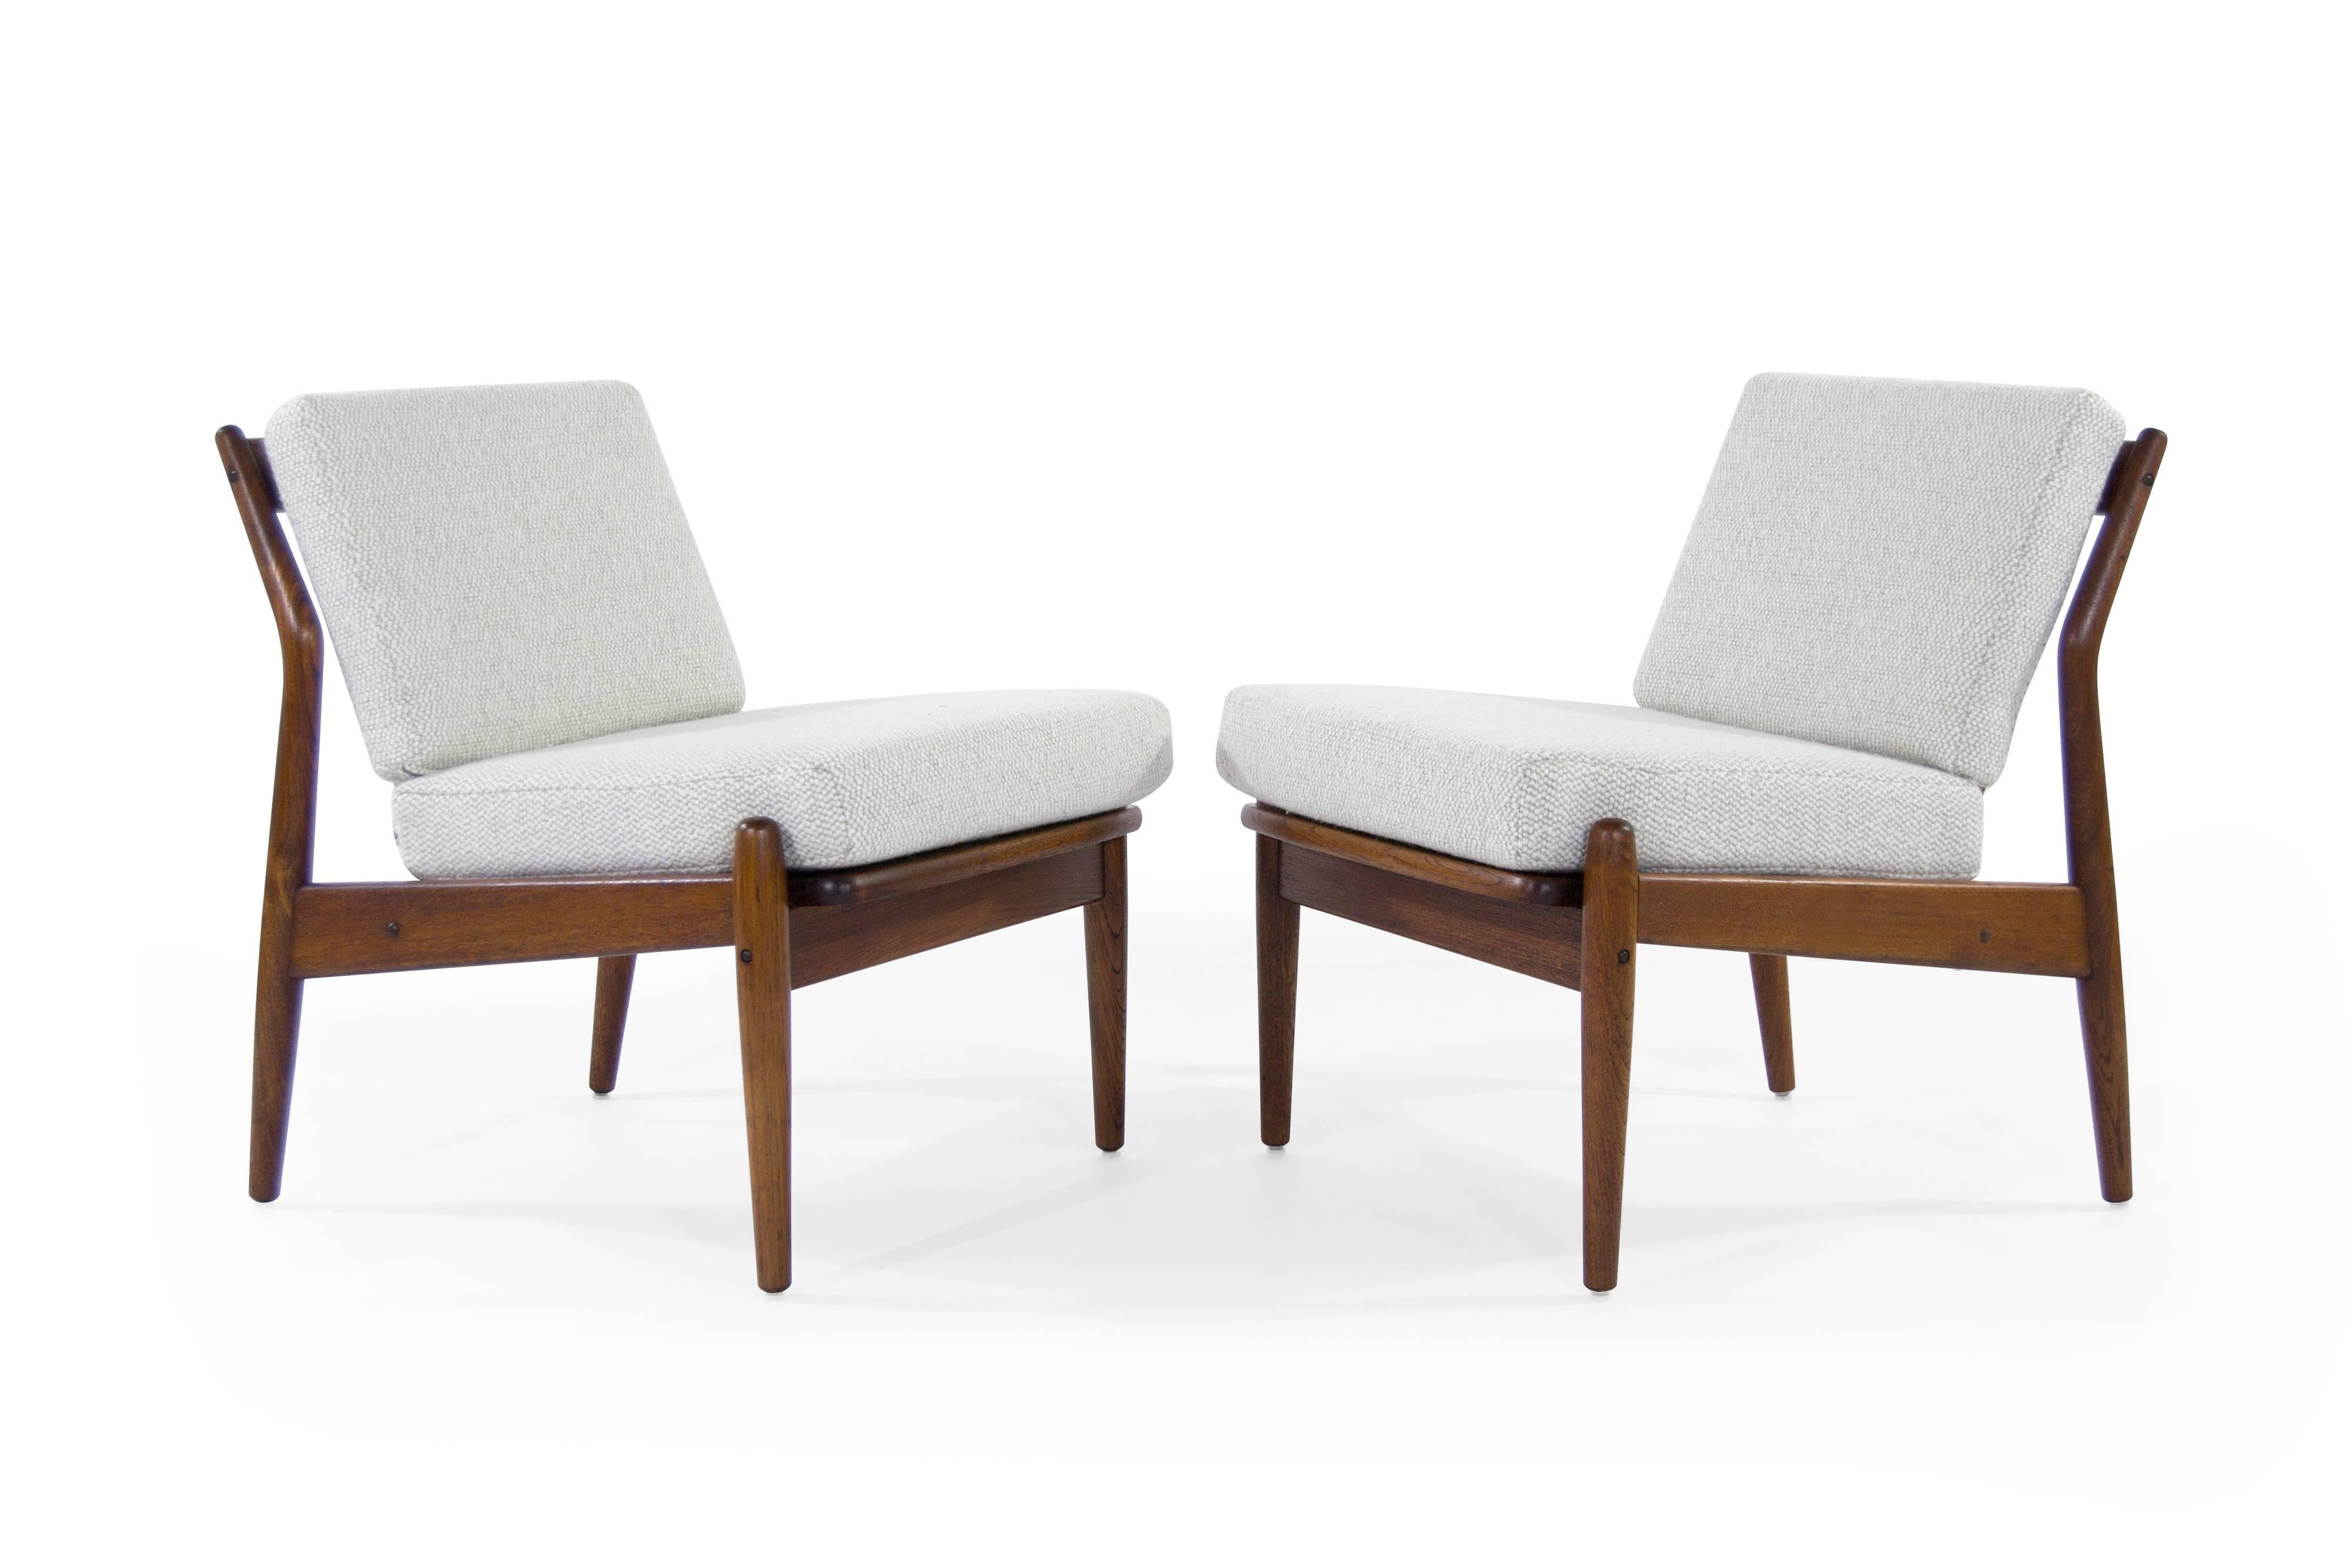 Stunning pair of slipper chairs attributed to Niels Moller, Denmark, 1950s.

Teak frames fully restored, new cushions upholstered in plush wool.